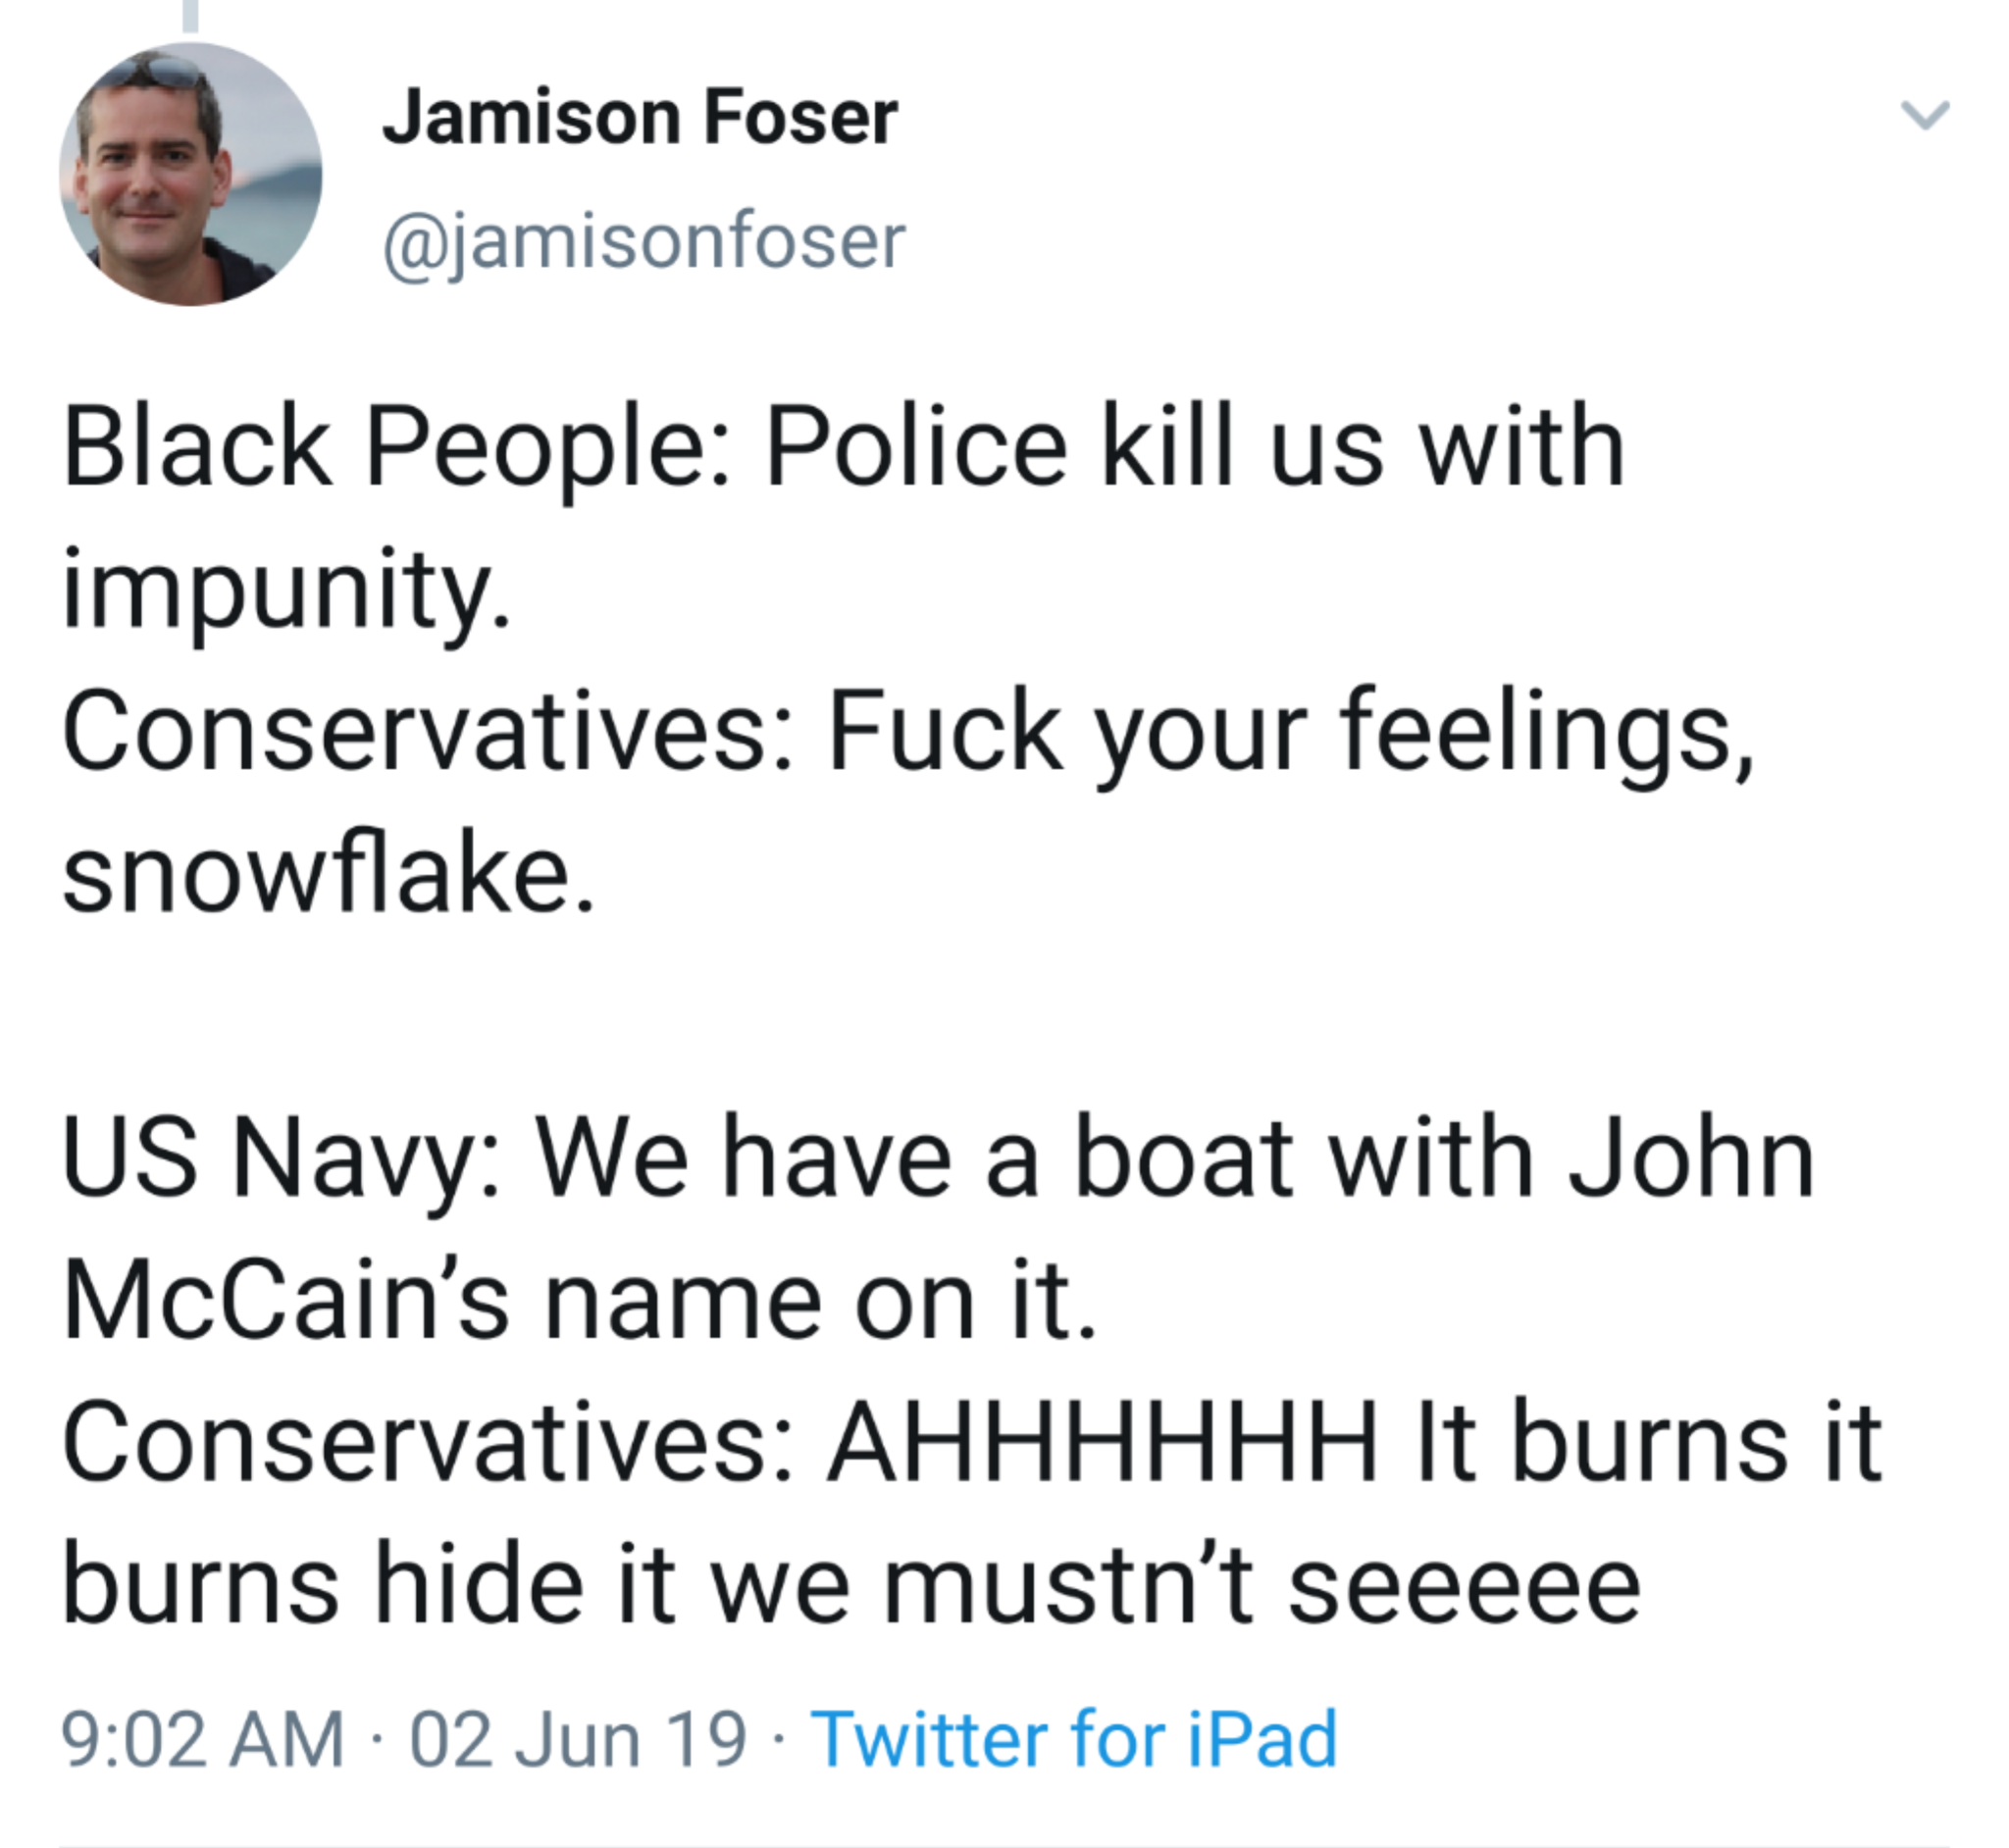 document - Jamison Foser Black People Police kill us with impunity. Conservatives Fuck your feelings, snowflake. Us Navy We have a boat with John McCain's name on it. Conservatives Ahhhhhh It burns it burns hide it we mustn't seeeee 02 Jun 19 Twitter for 